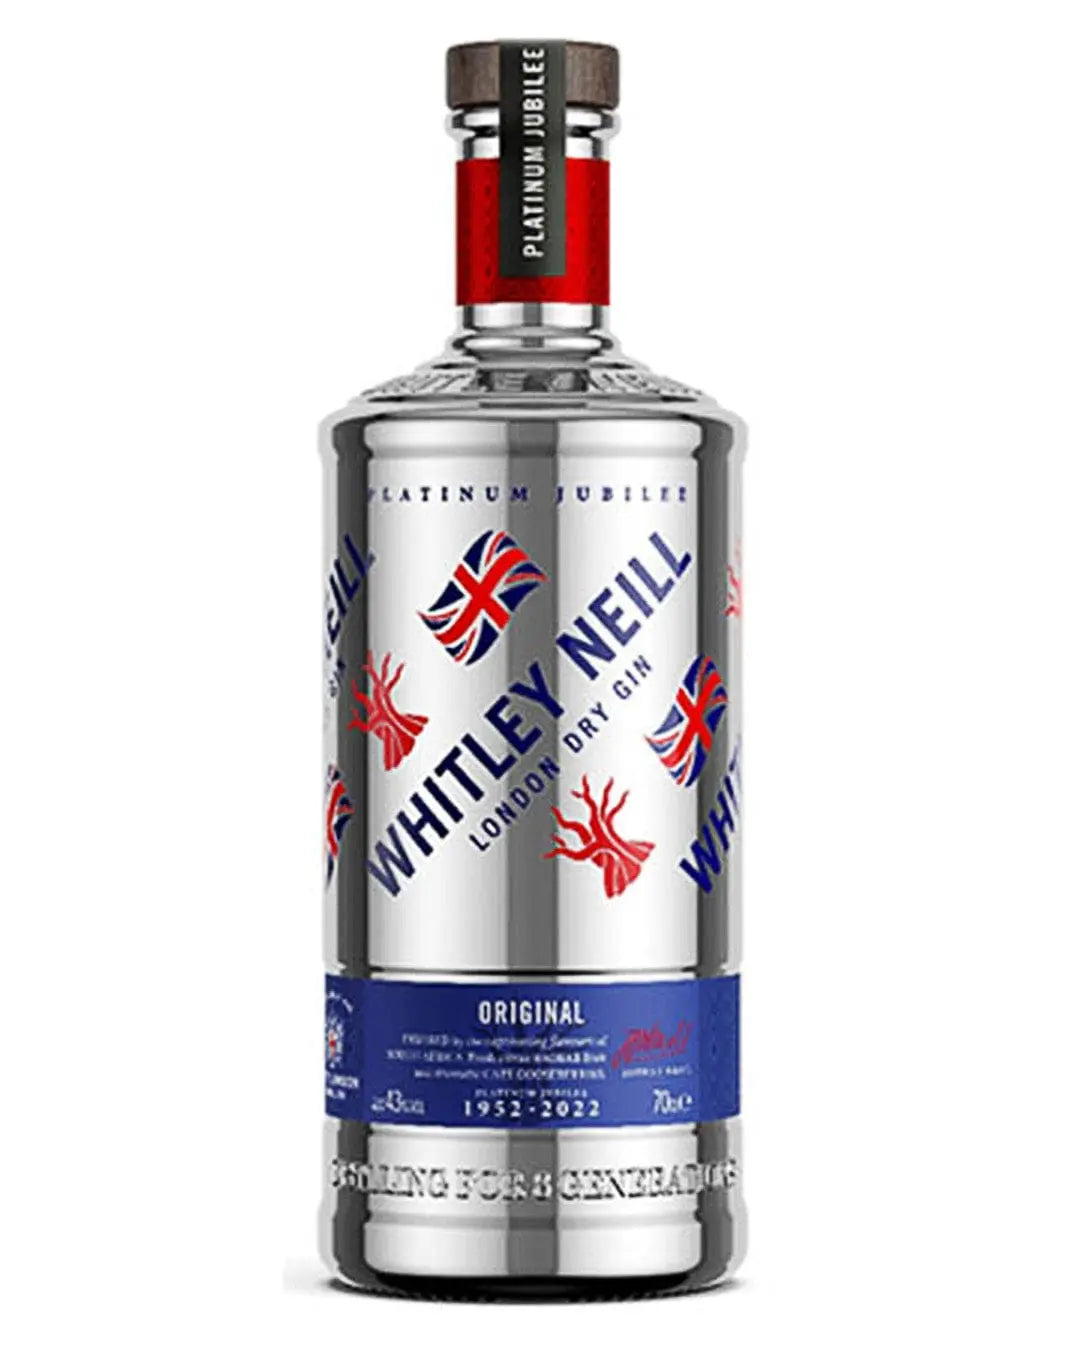 Whitley Neill Platinum Jubilee Gin, 70 cl Gin